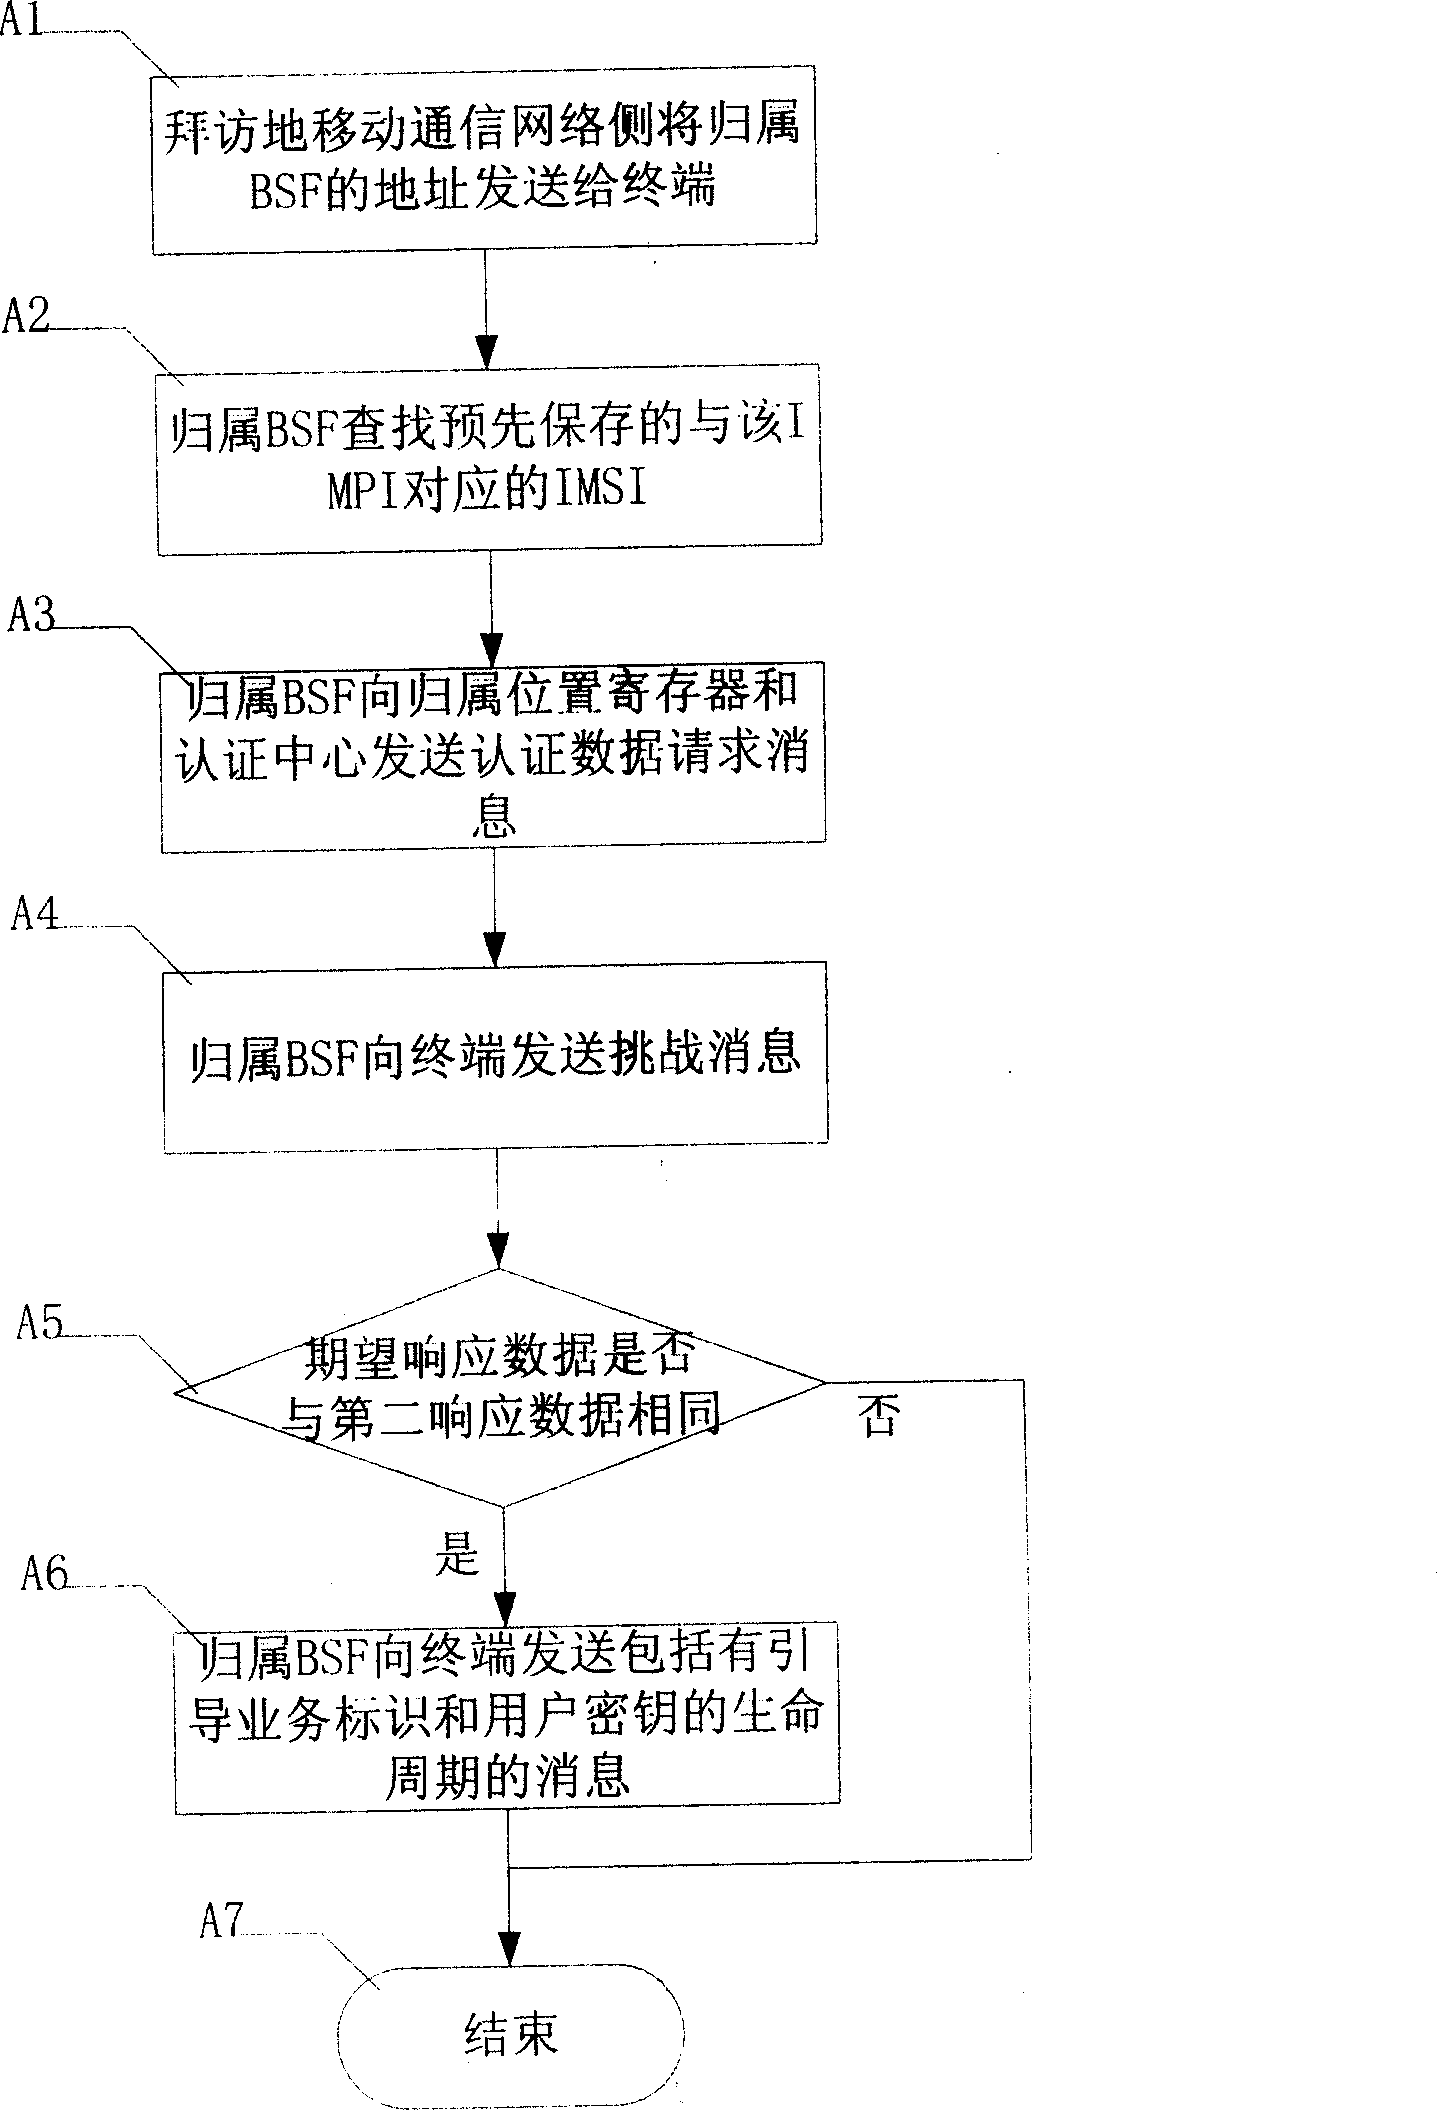 Method and system for realizing user key arrangement in mobile broadcast television service